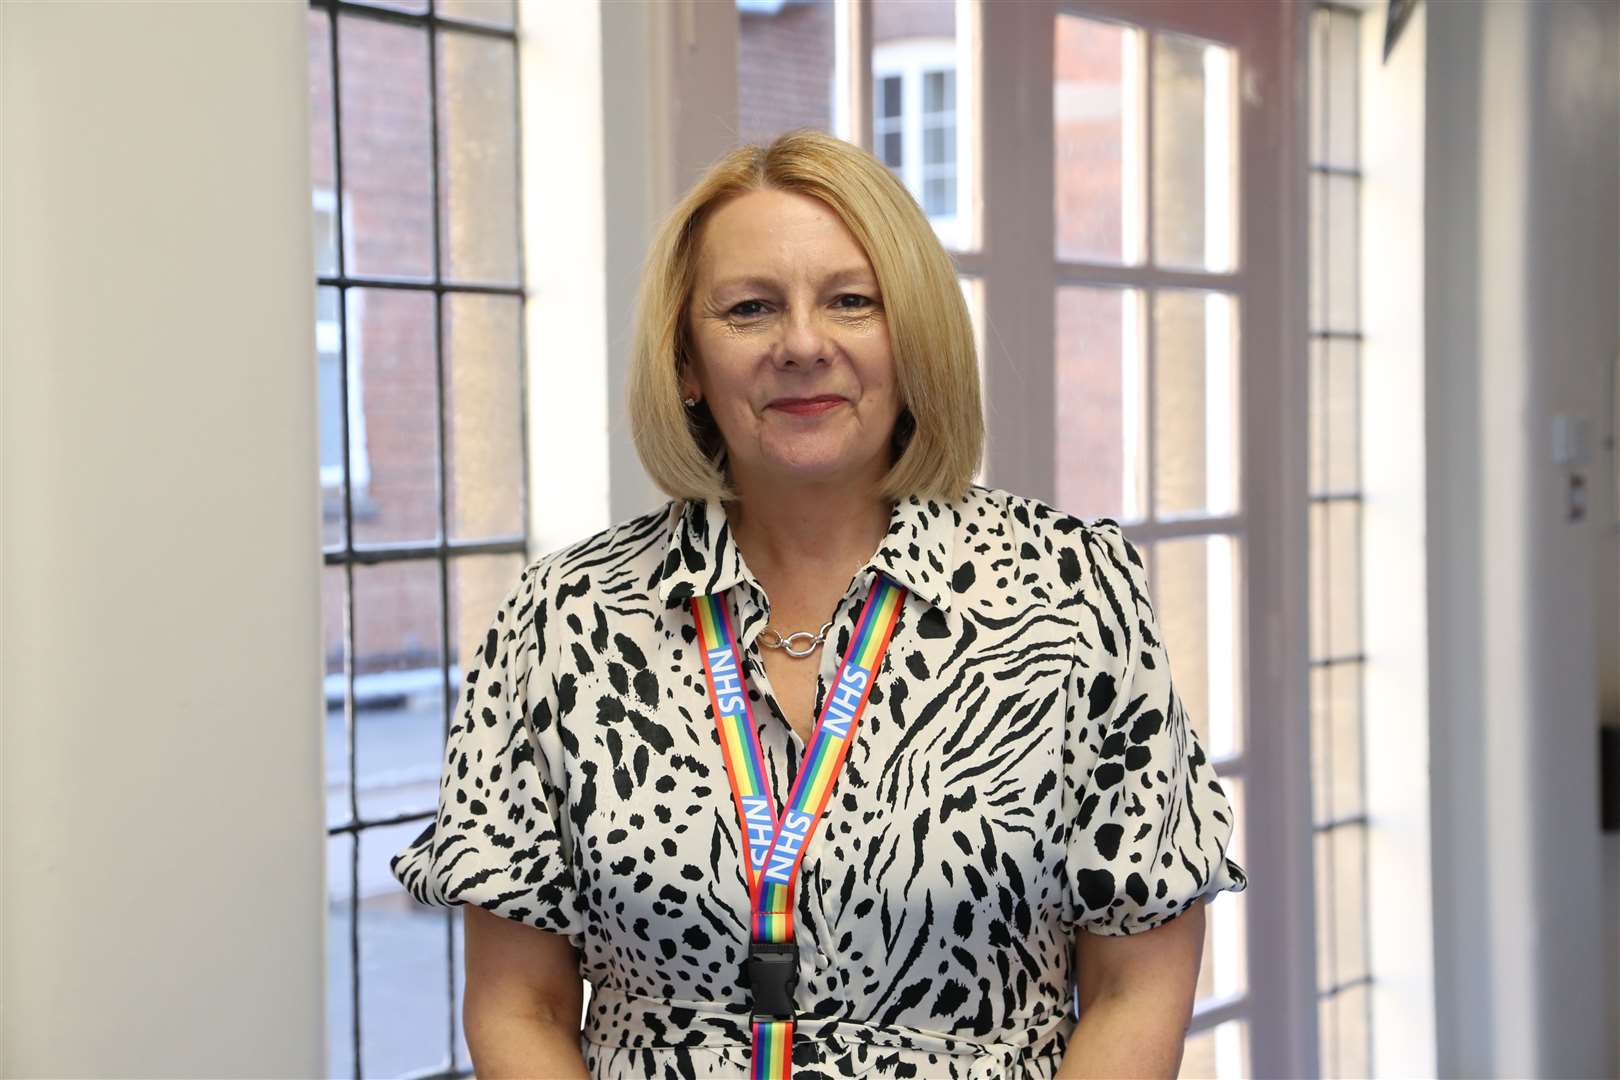 Jayne Black is the new chief executive of Medway NHS Foundation Trust